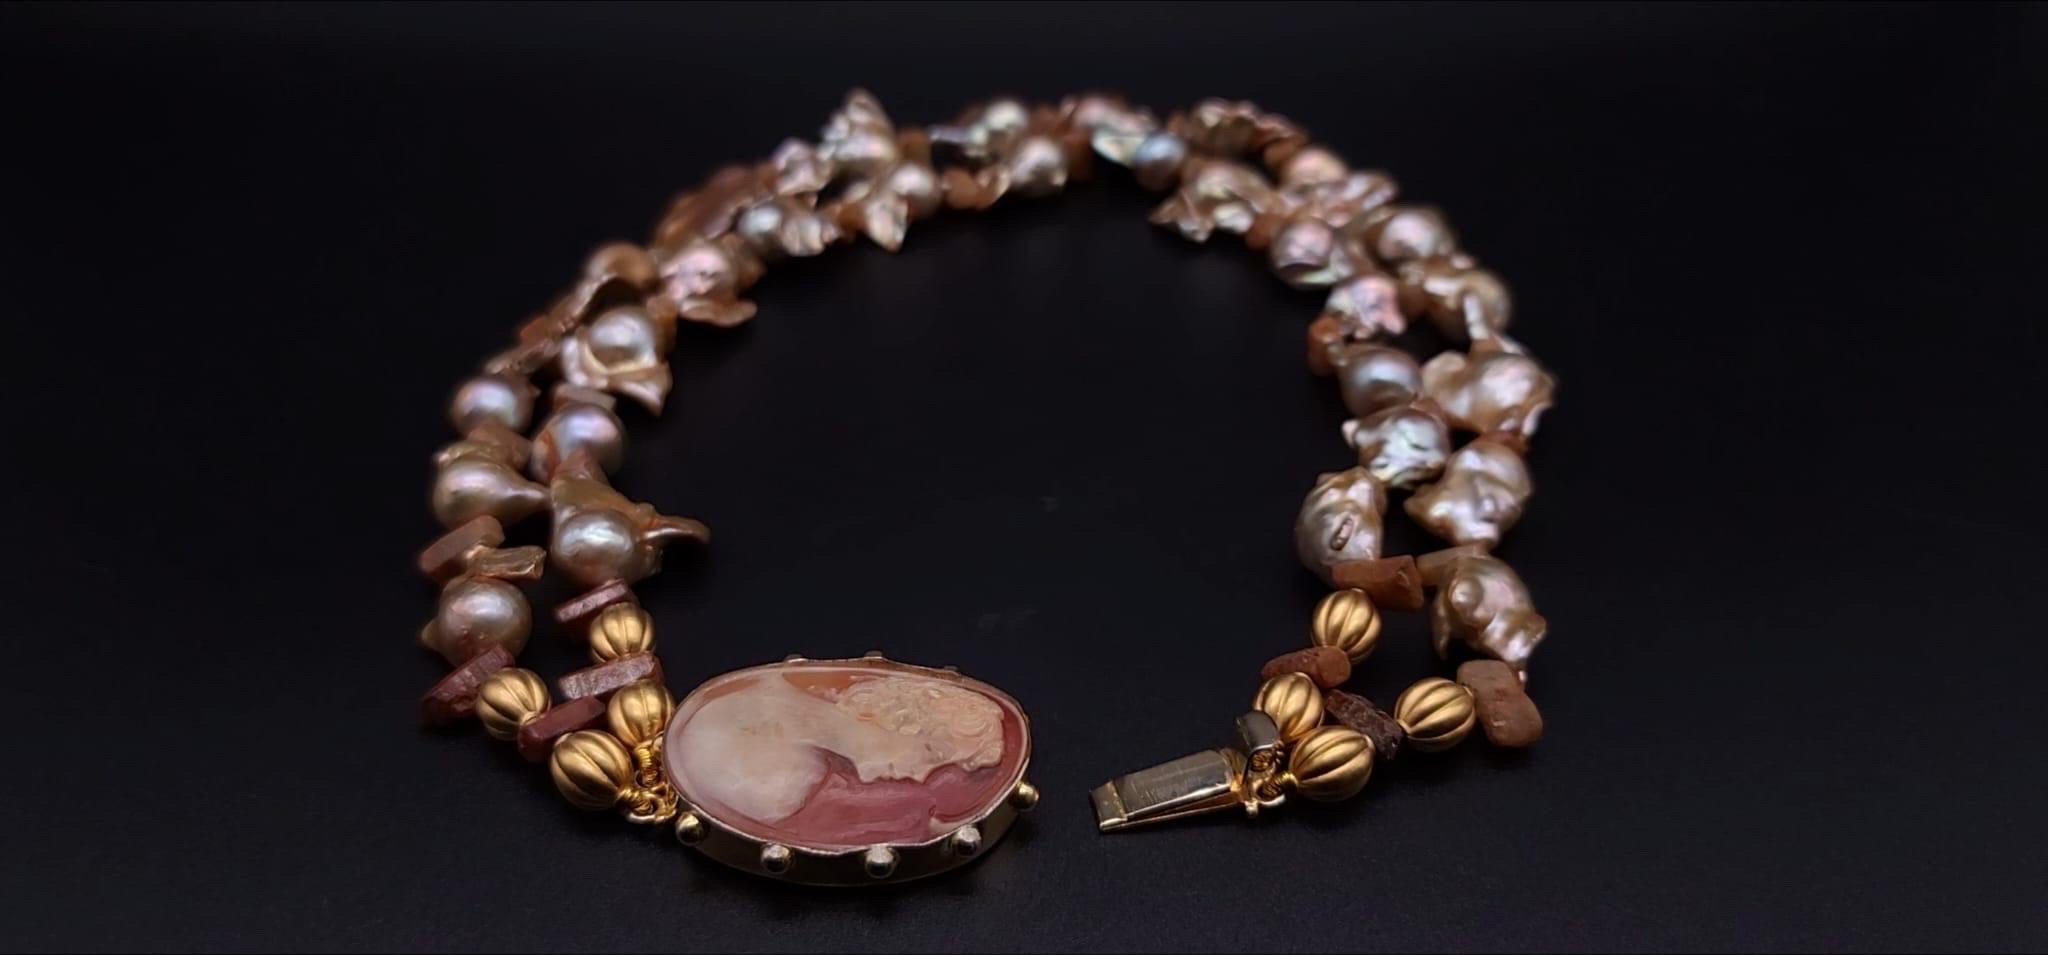 A.Jeschel Stunning Gold Baroque Pearl necklace with an Italian cameo side clasp. 3